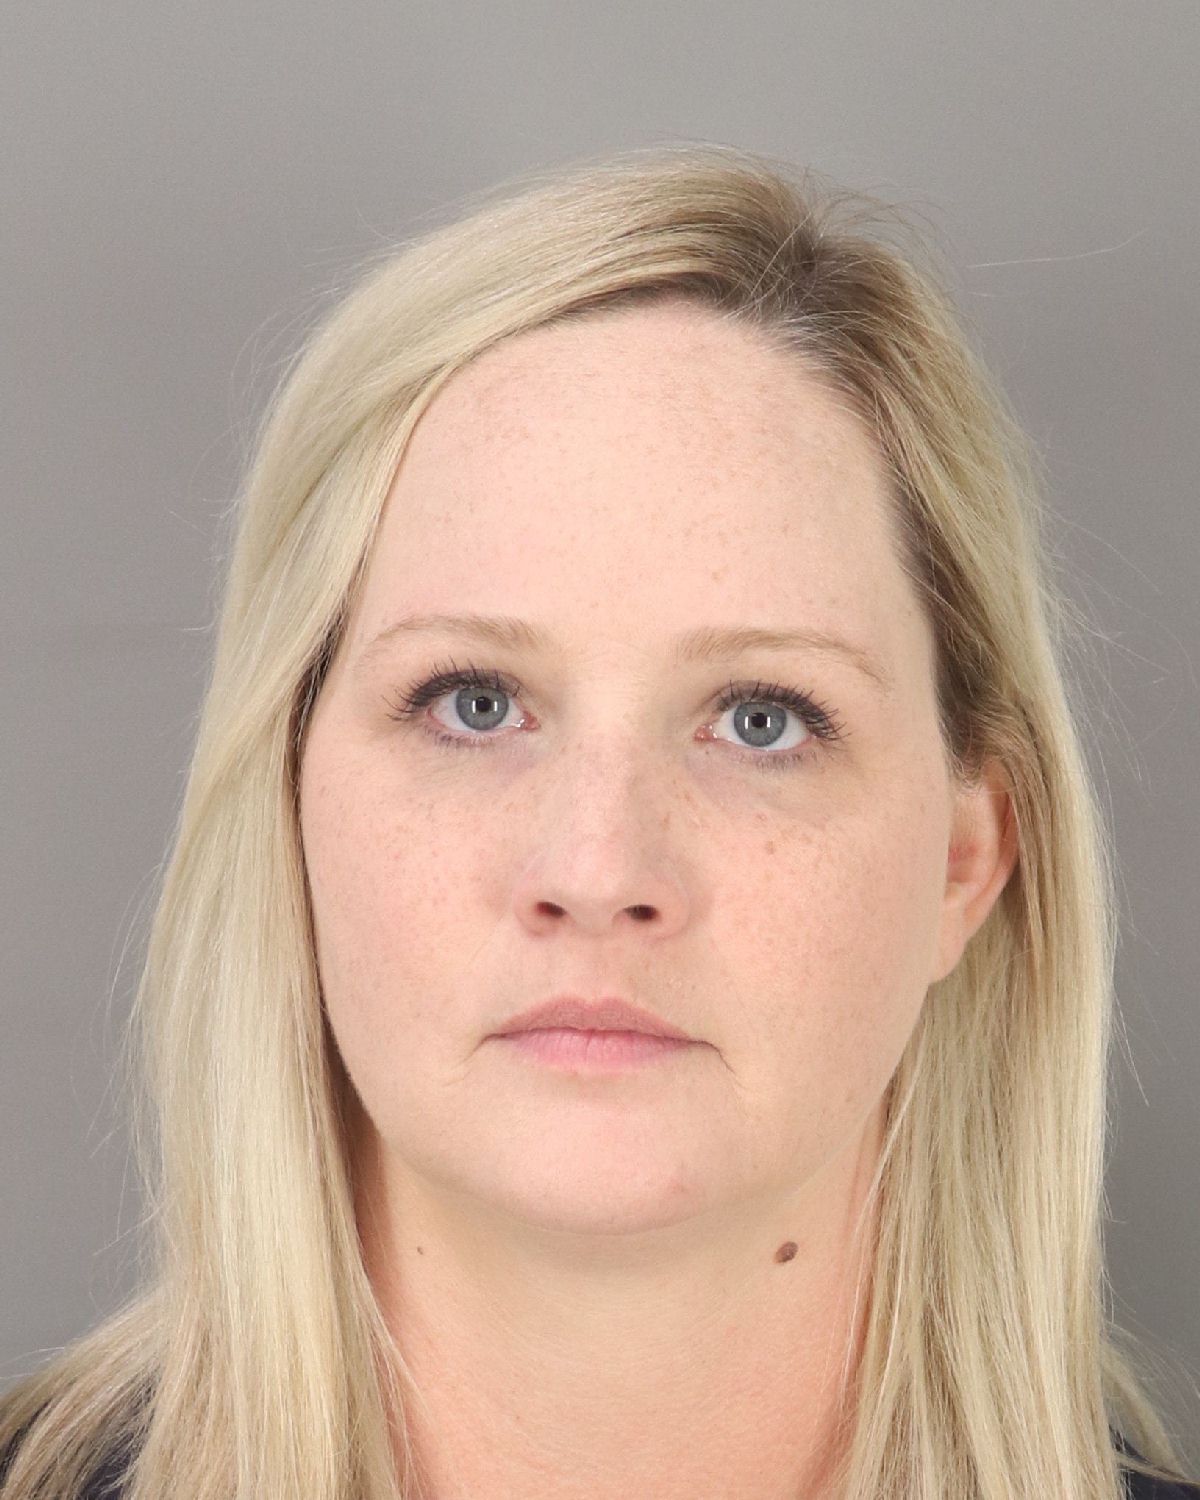 Mary G. Bond, 37, was arrested May 9 after new charges were discovered by the court for an out-of-county crime